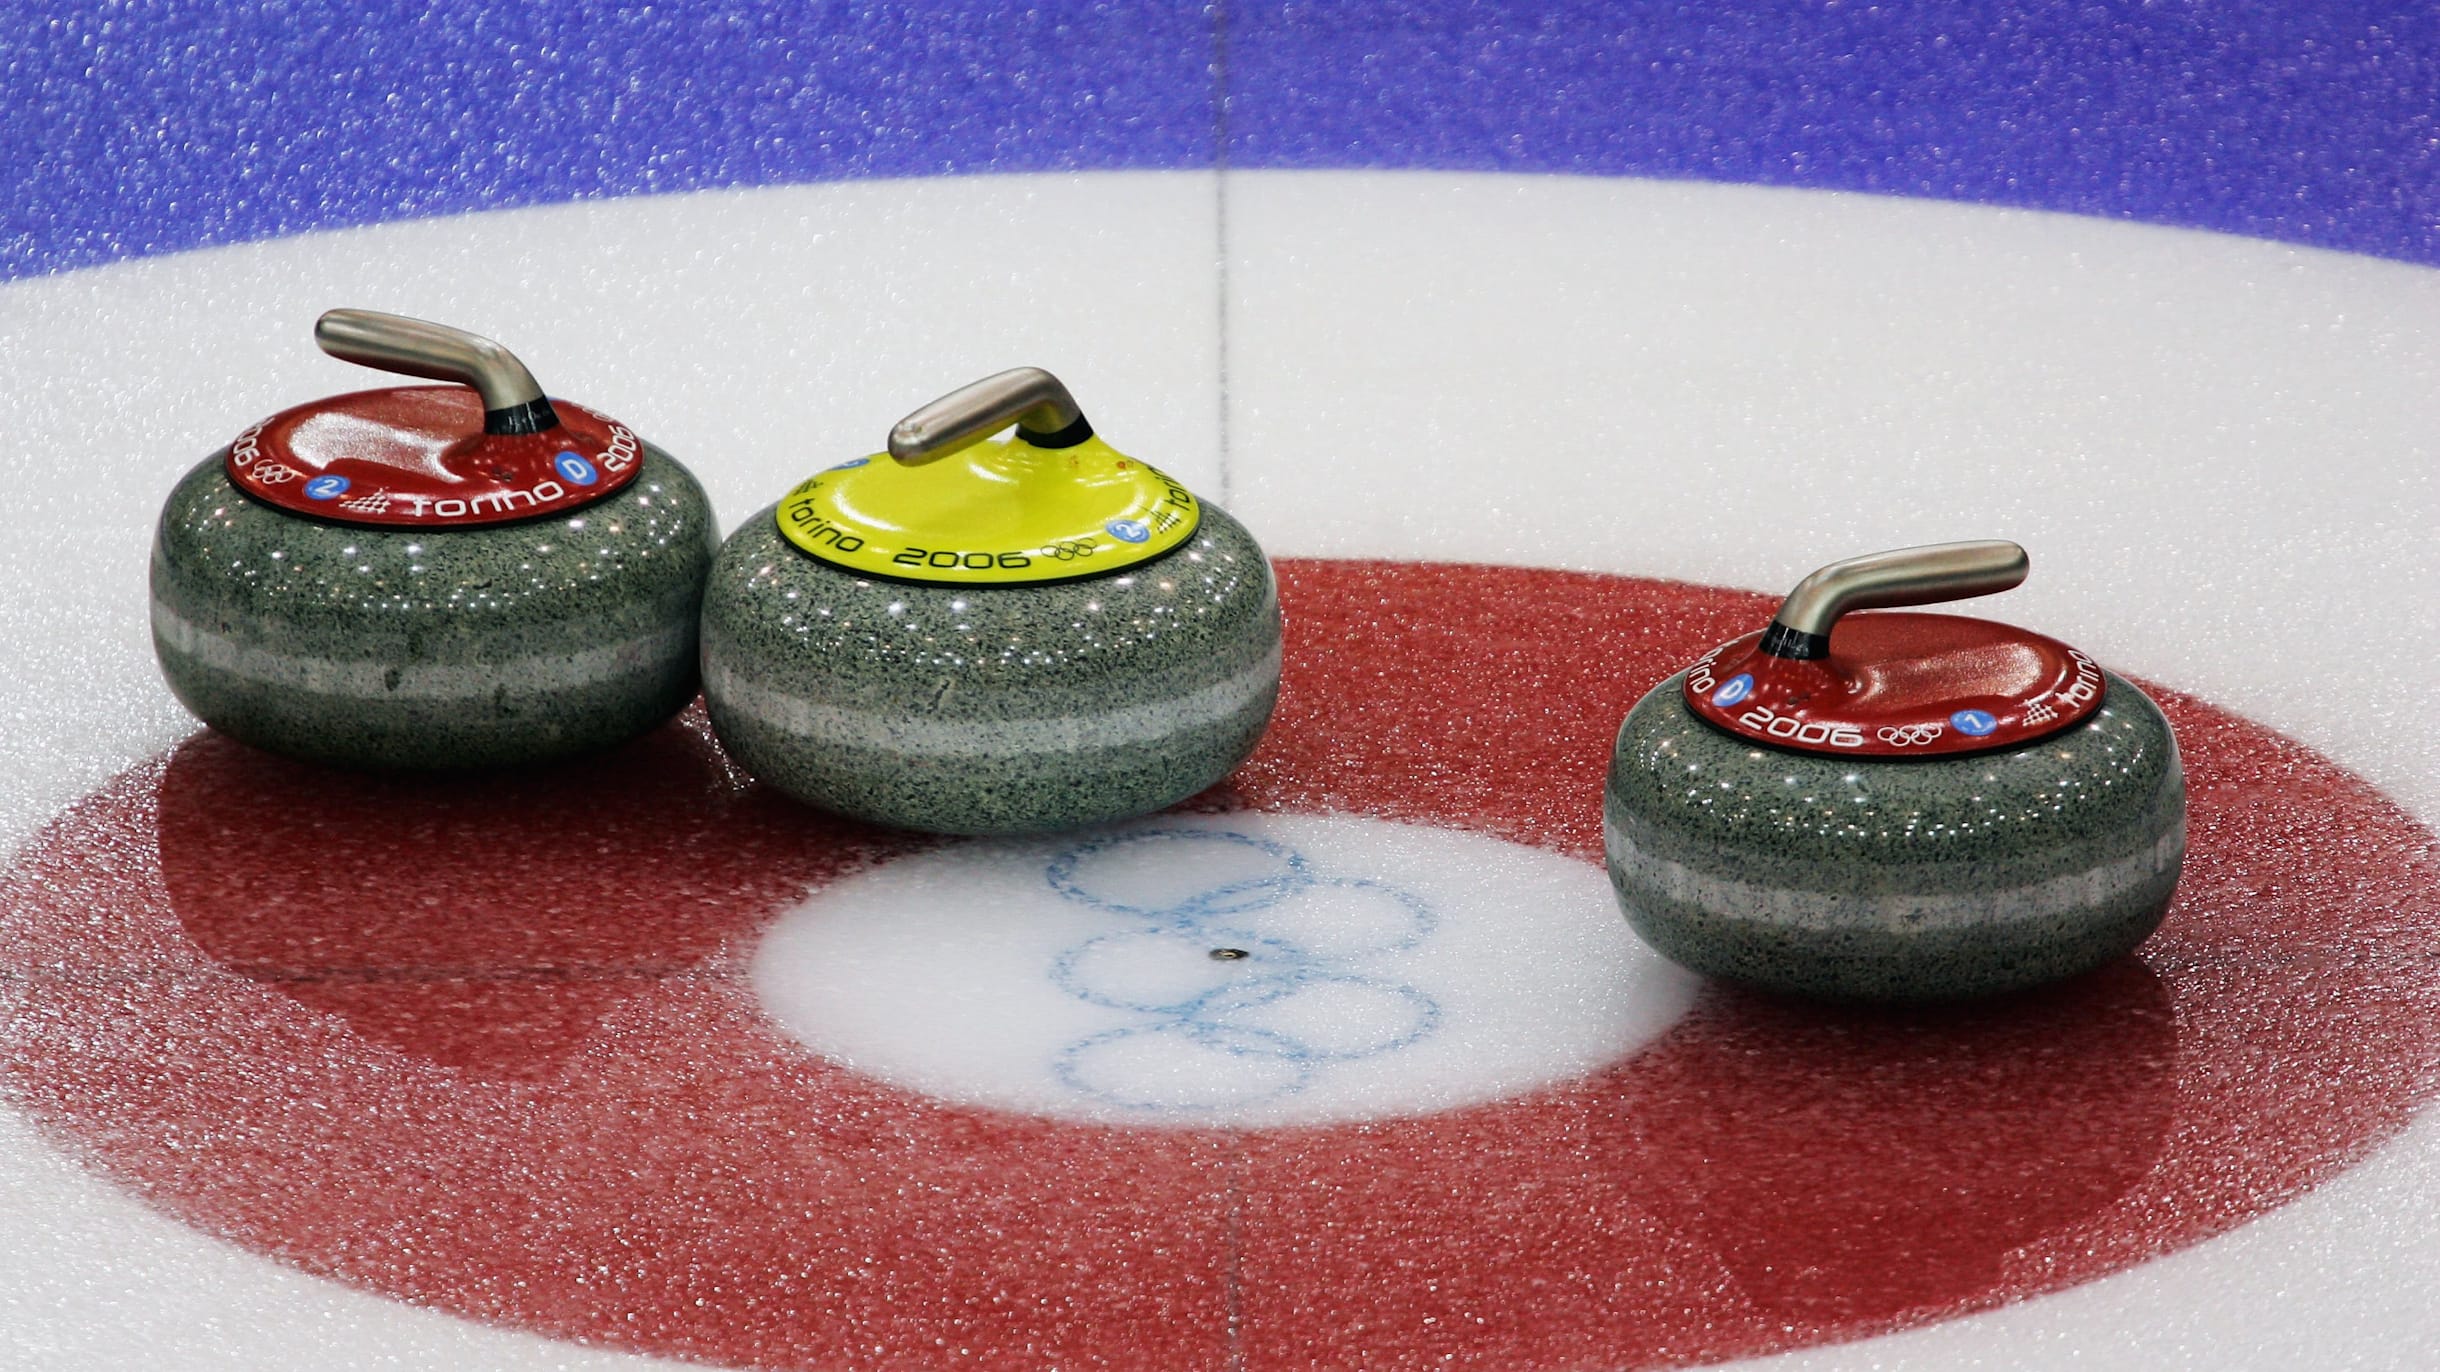 Curling at Lausanne 2020 All you need to know